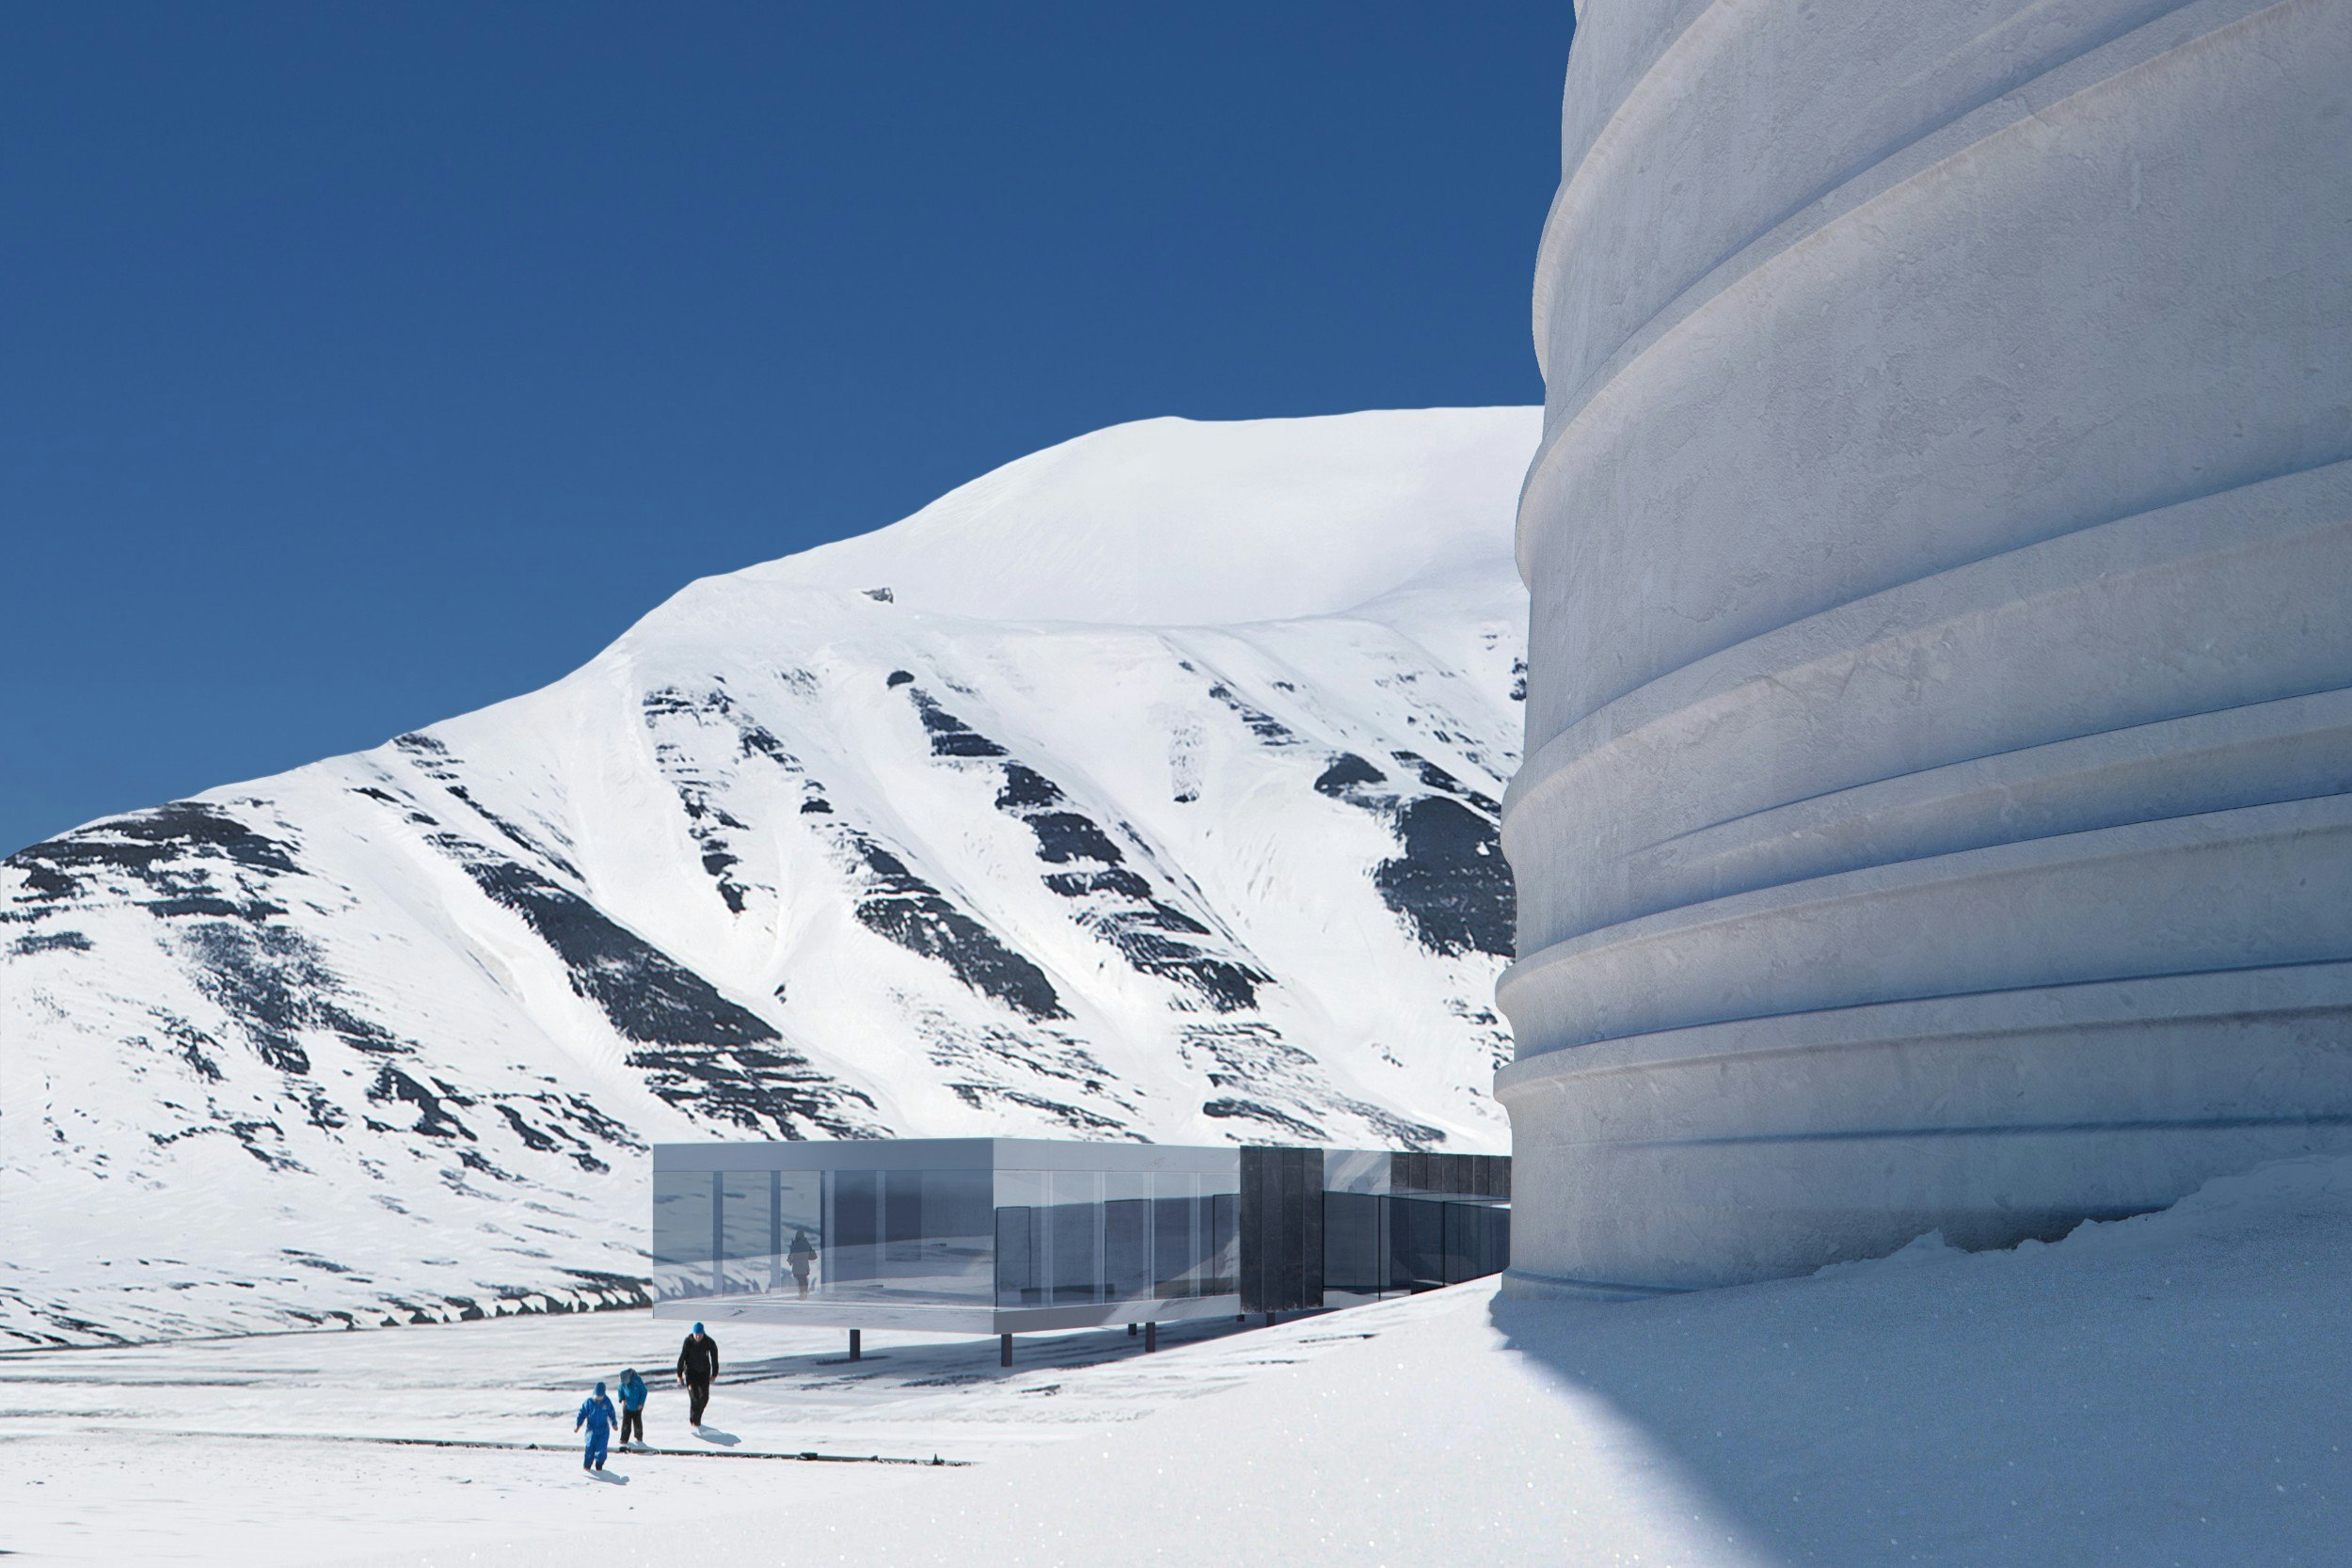 The exterior of The Arc in Svalbard in the snow